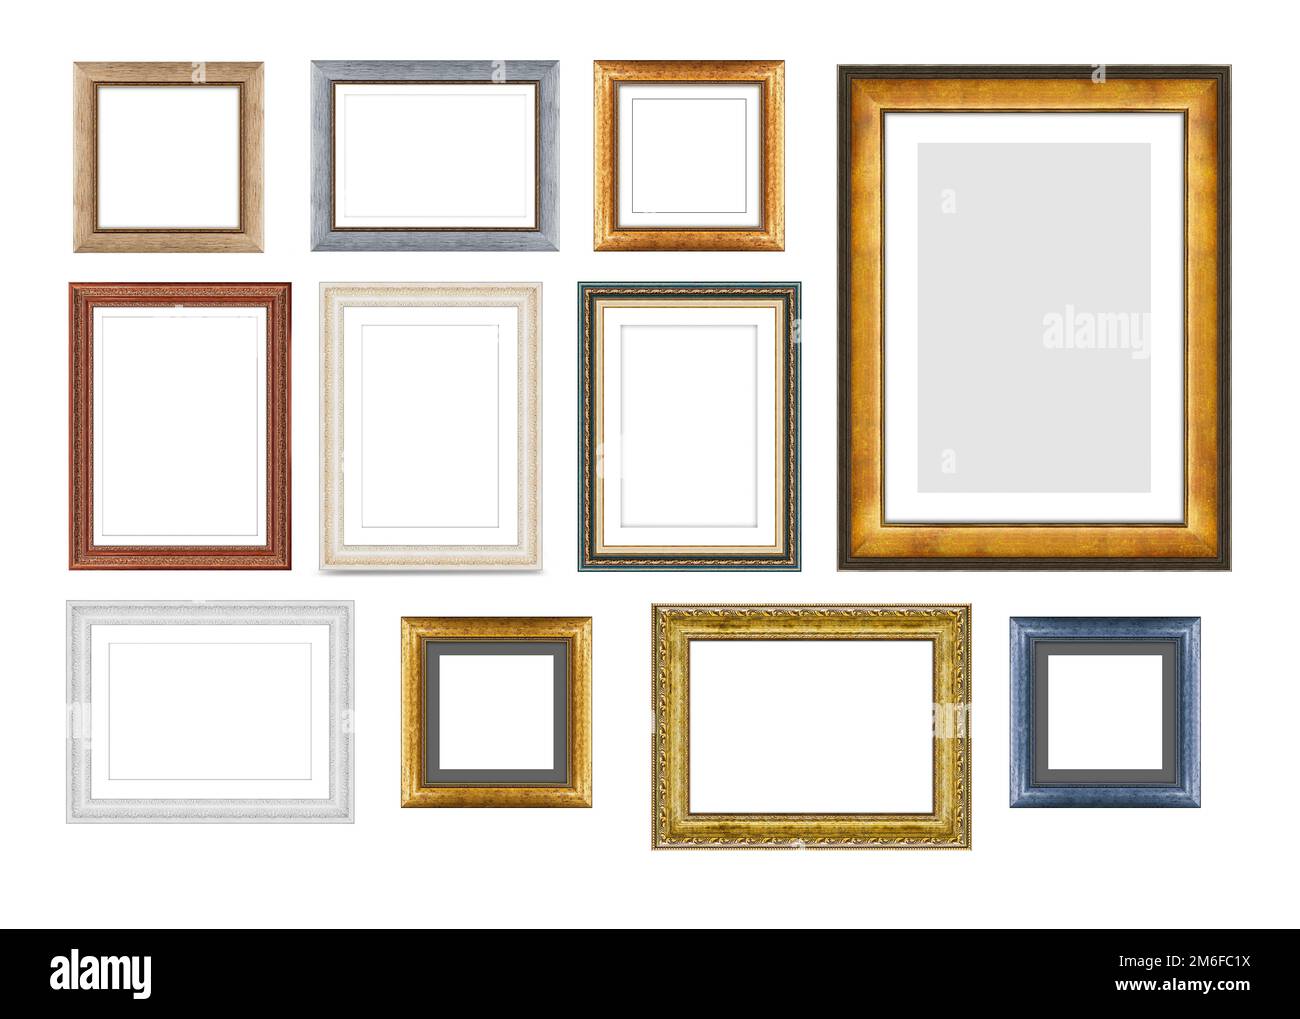 Set of vintage wooden frames for pictures or photos, frames for a mirror Stock Photo